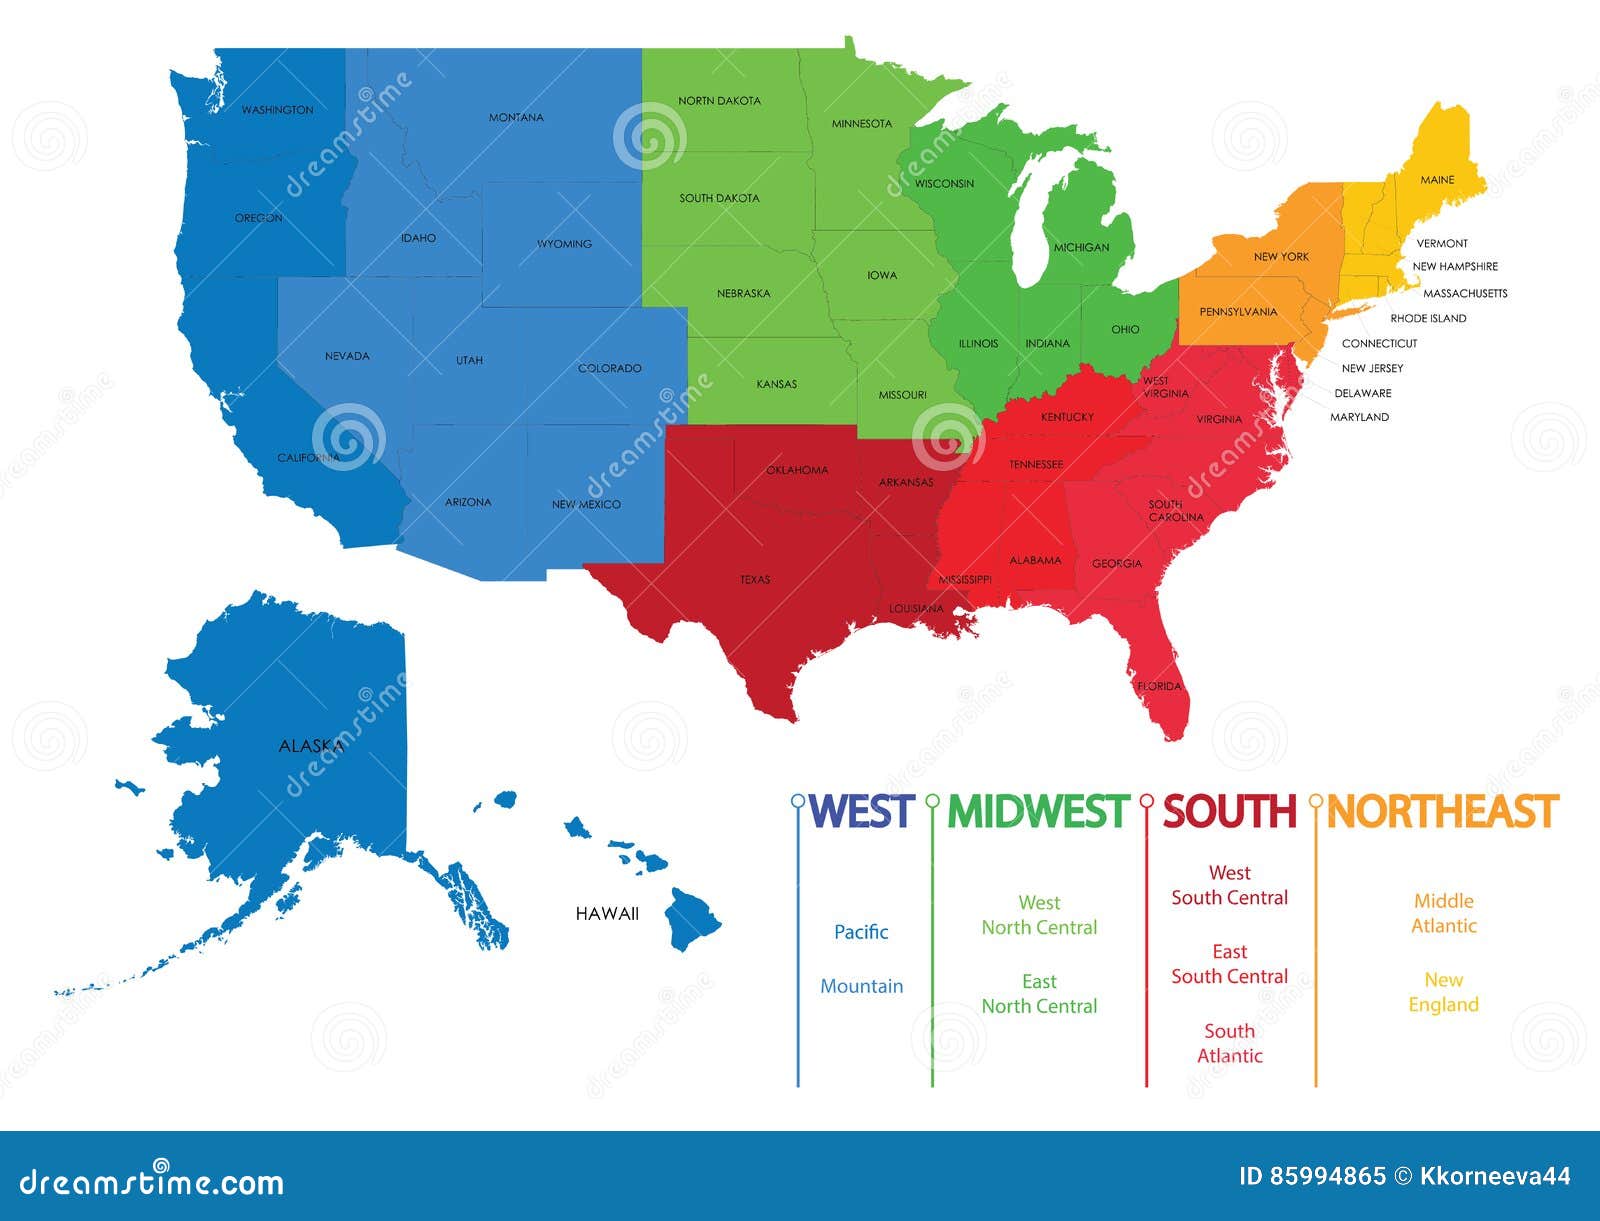 map of us regions. maps usa